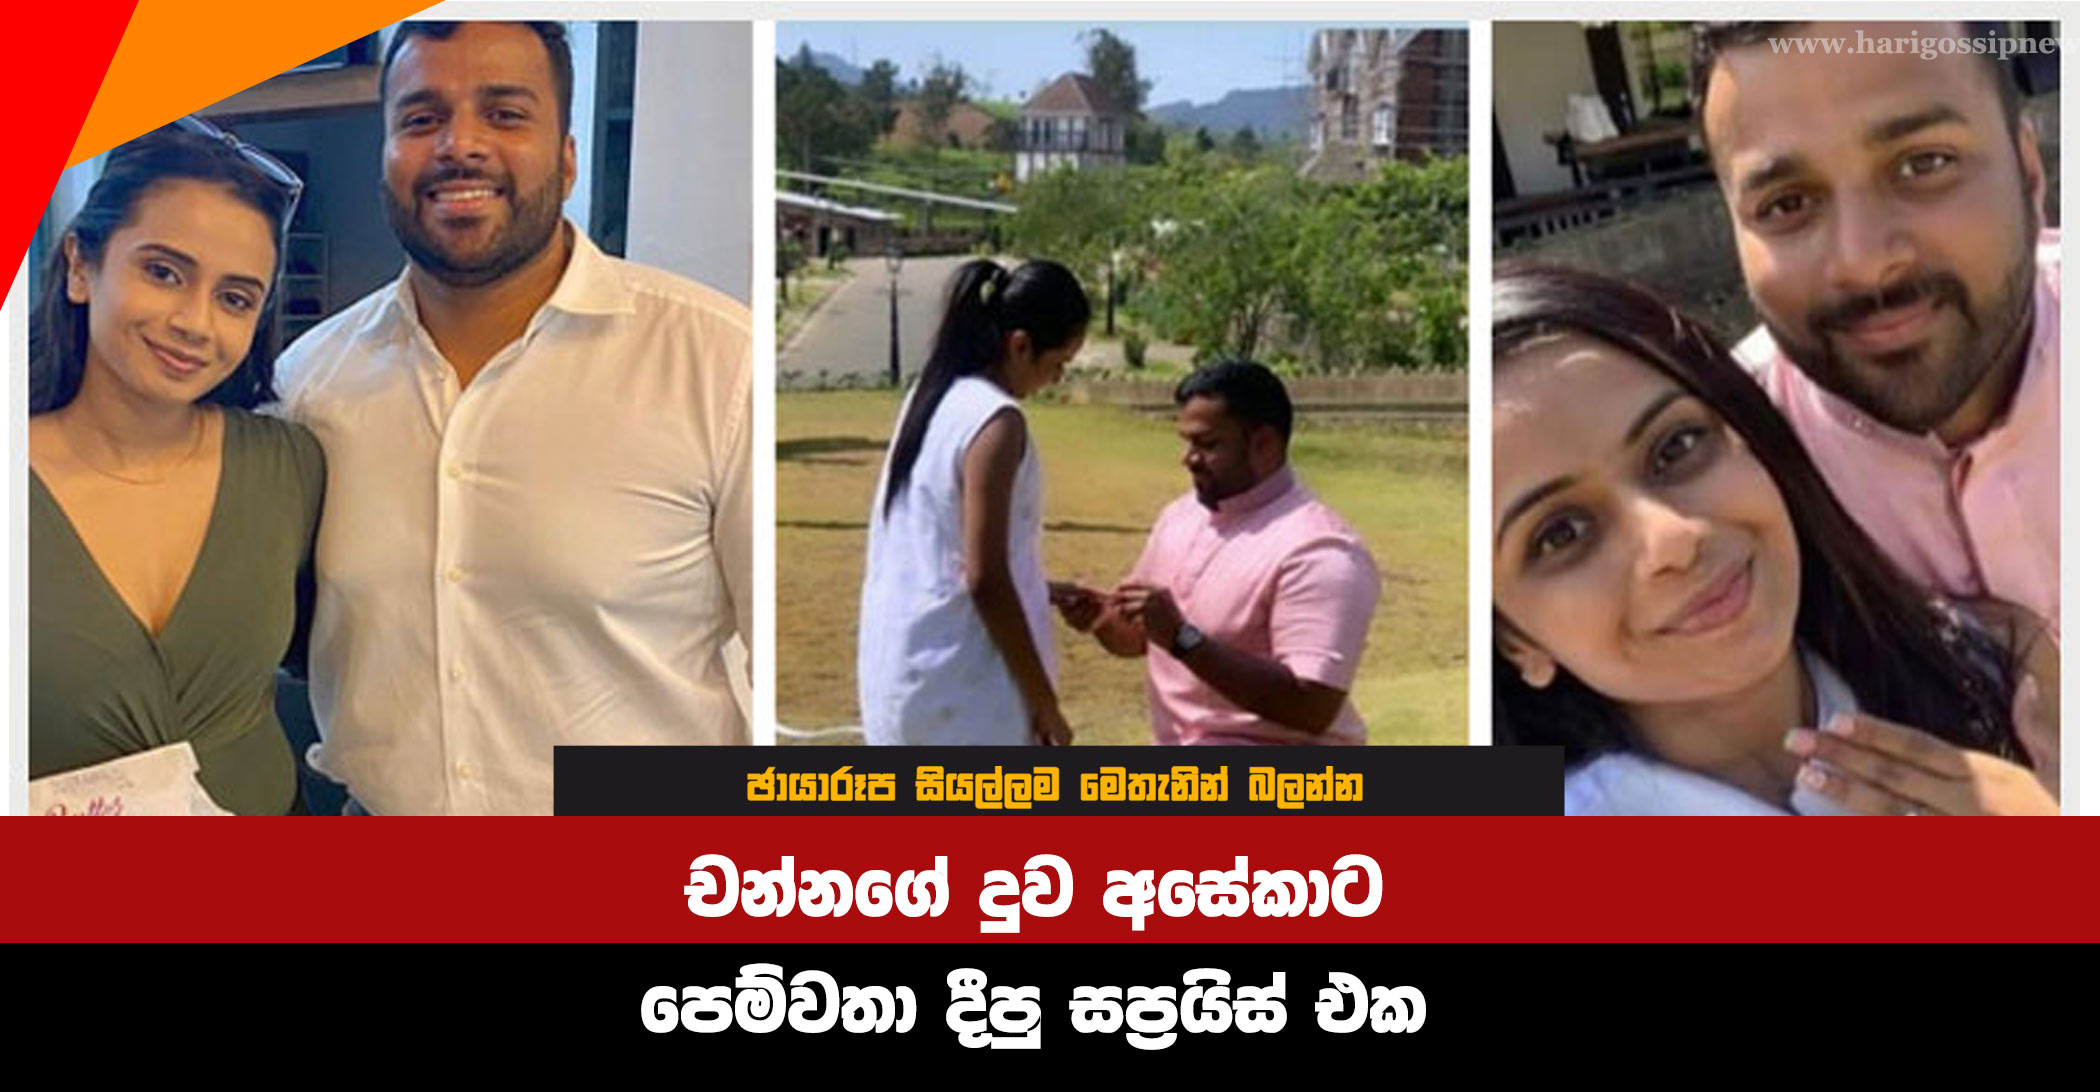 The surprise given by Channa Wijewardena's daughter Aseka to her boyfriend